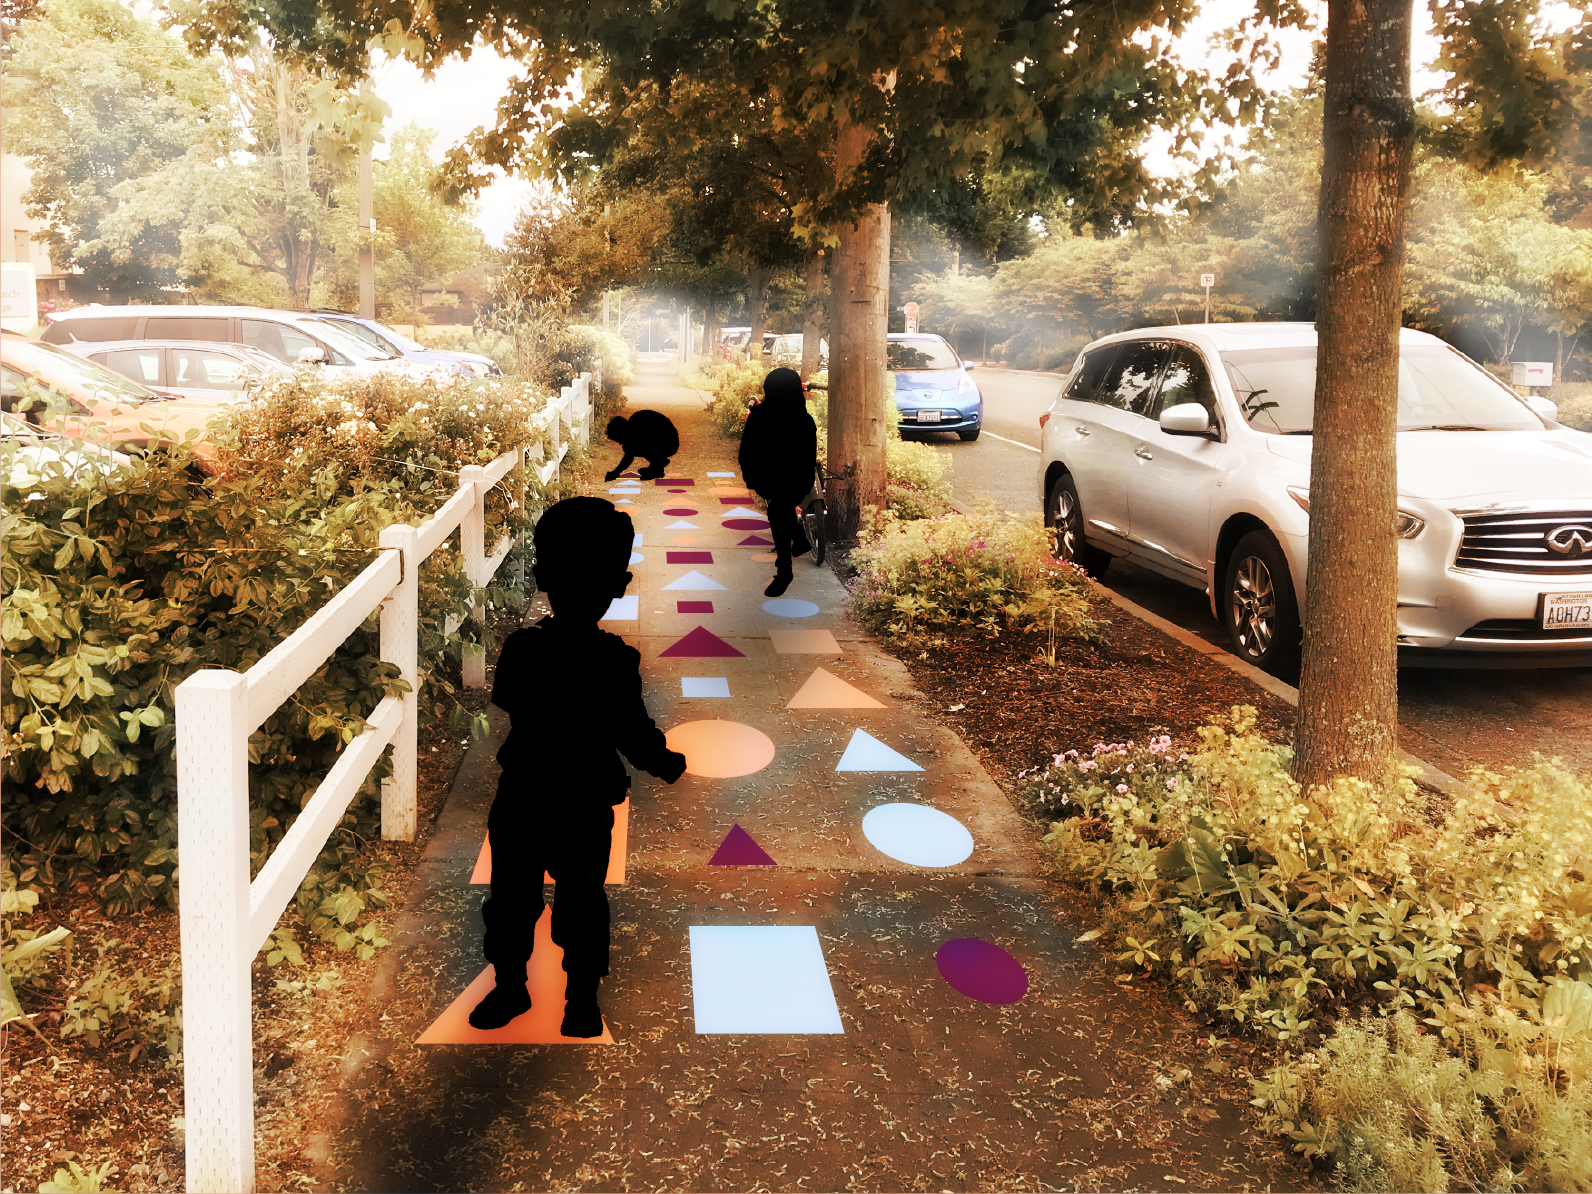 A rendering of the project after completion with children walking on the Learning Landscape sidewalk